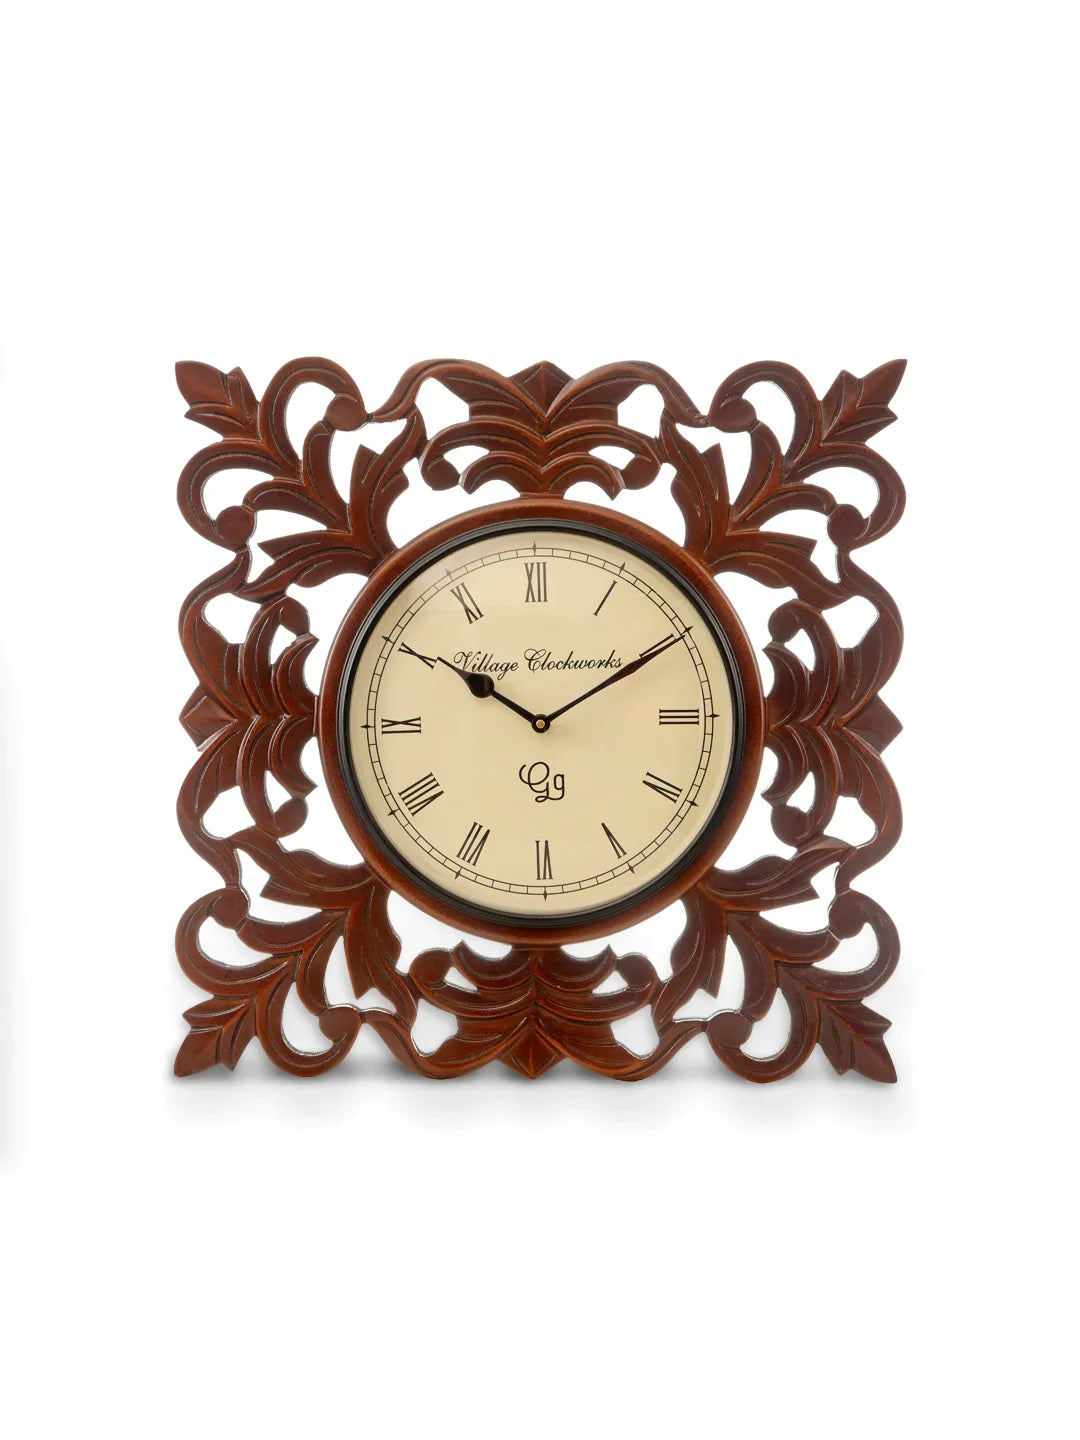 Square Carving Wooden 16 Inches Analog Wall Clock'